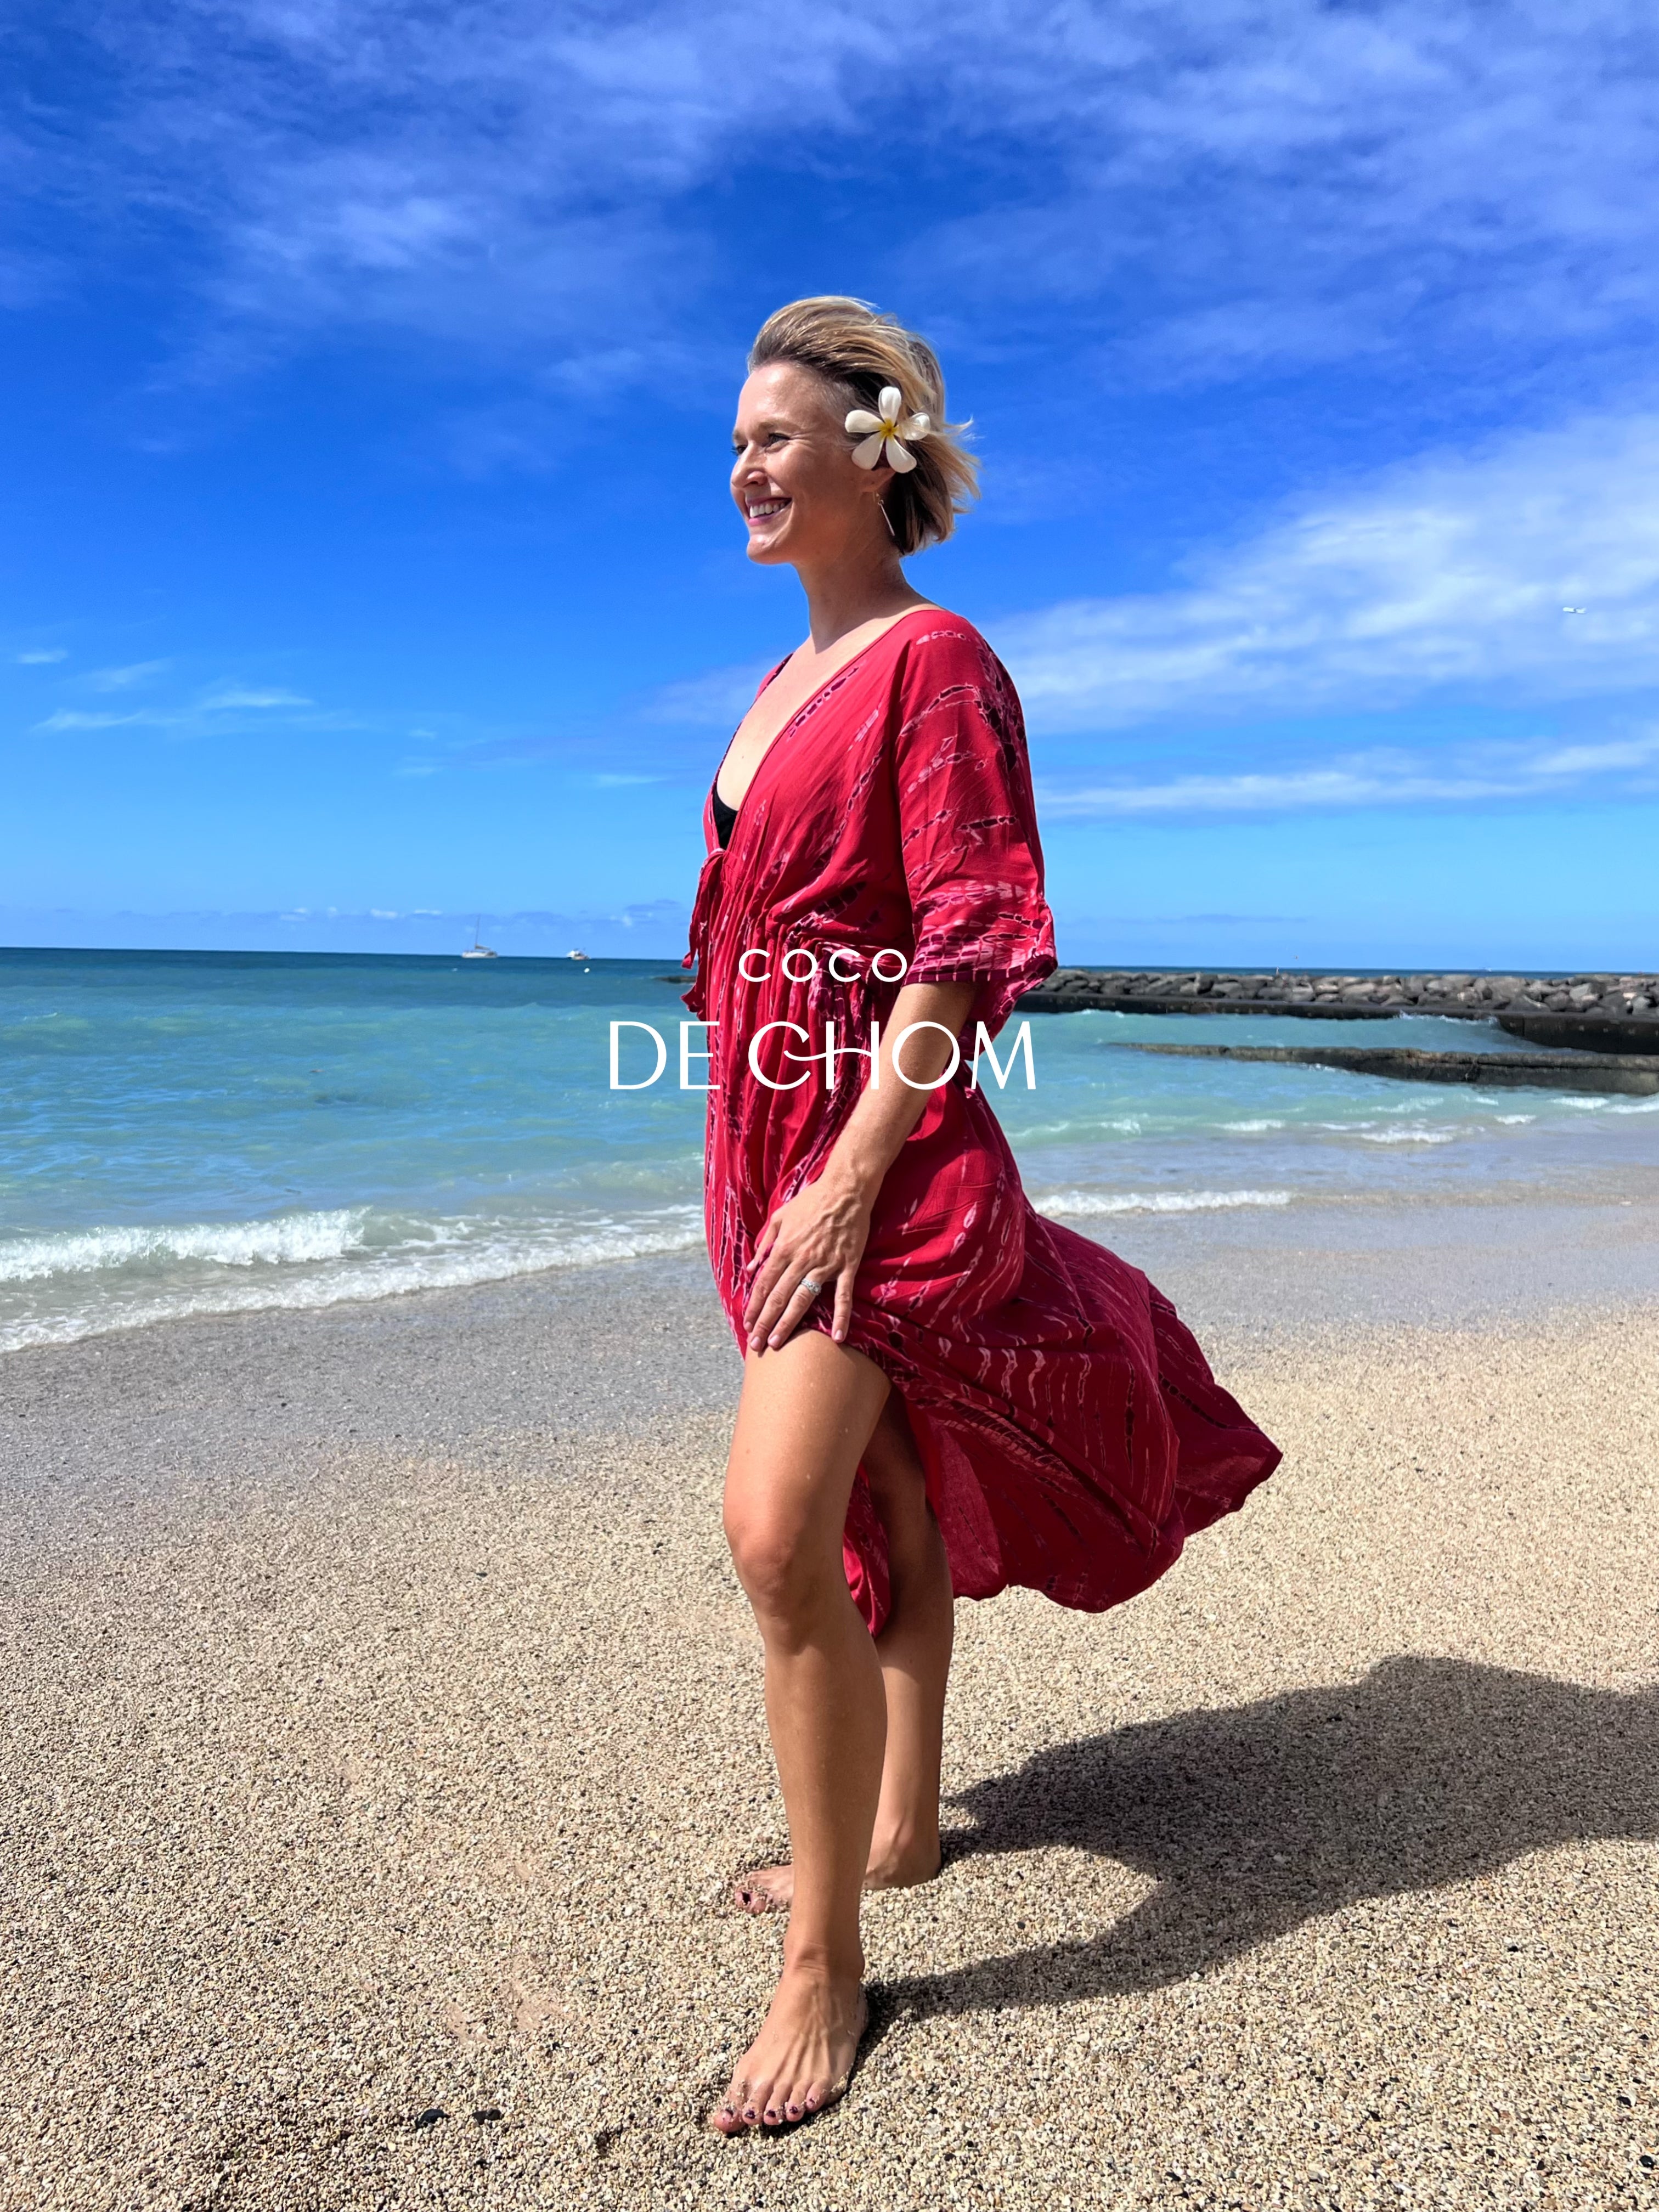 Shop Red Kaftan, Dress for vacation, resortwear  handmade with love from Coco de Chom?